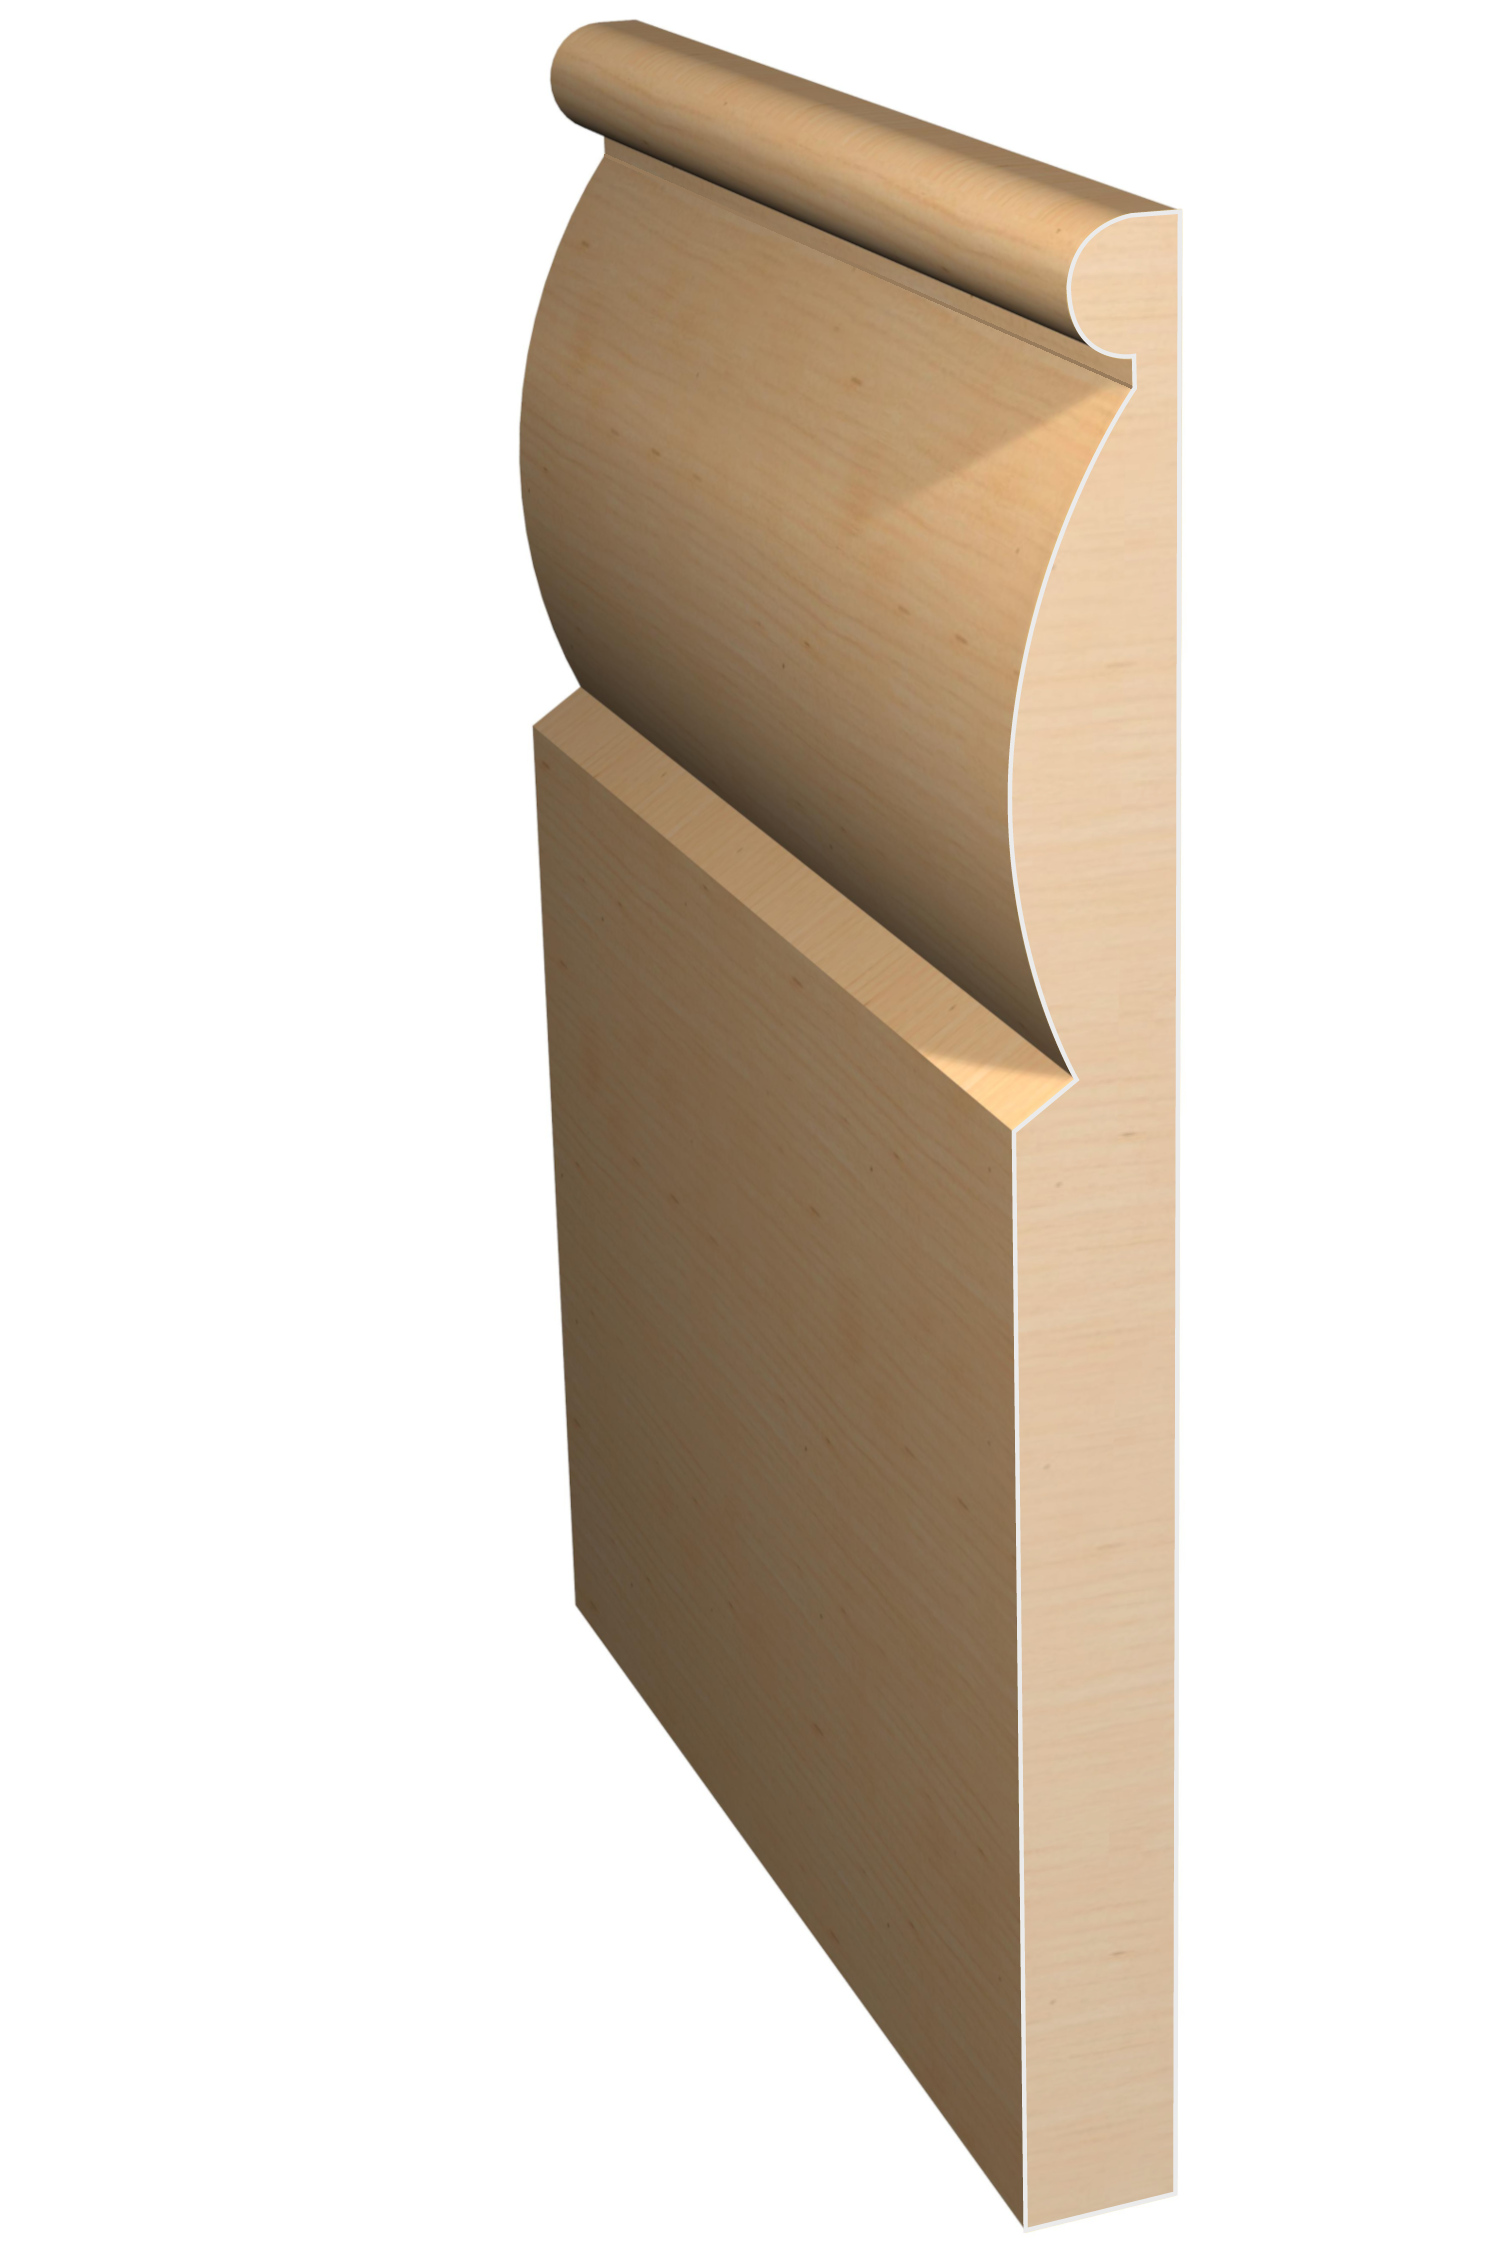 Three dimensional rendering of custom base wood molding BAPL9181 made by Public Lumber Company in Detroit.